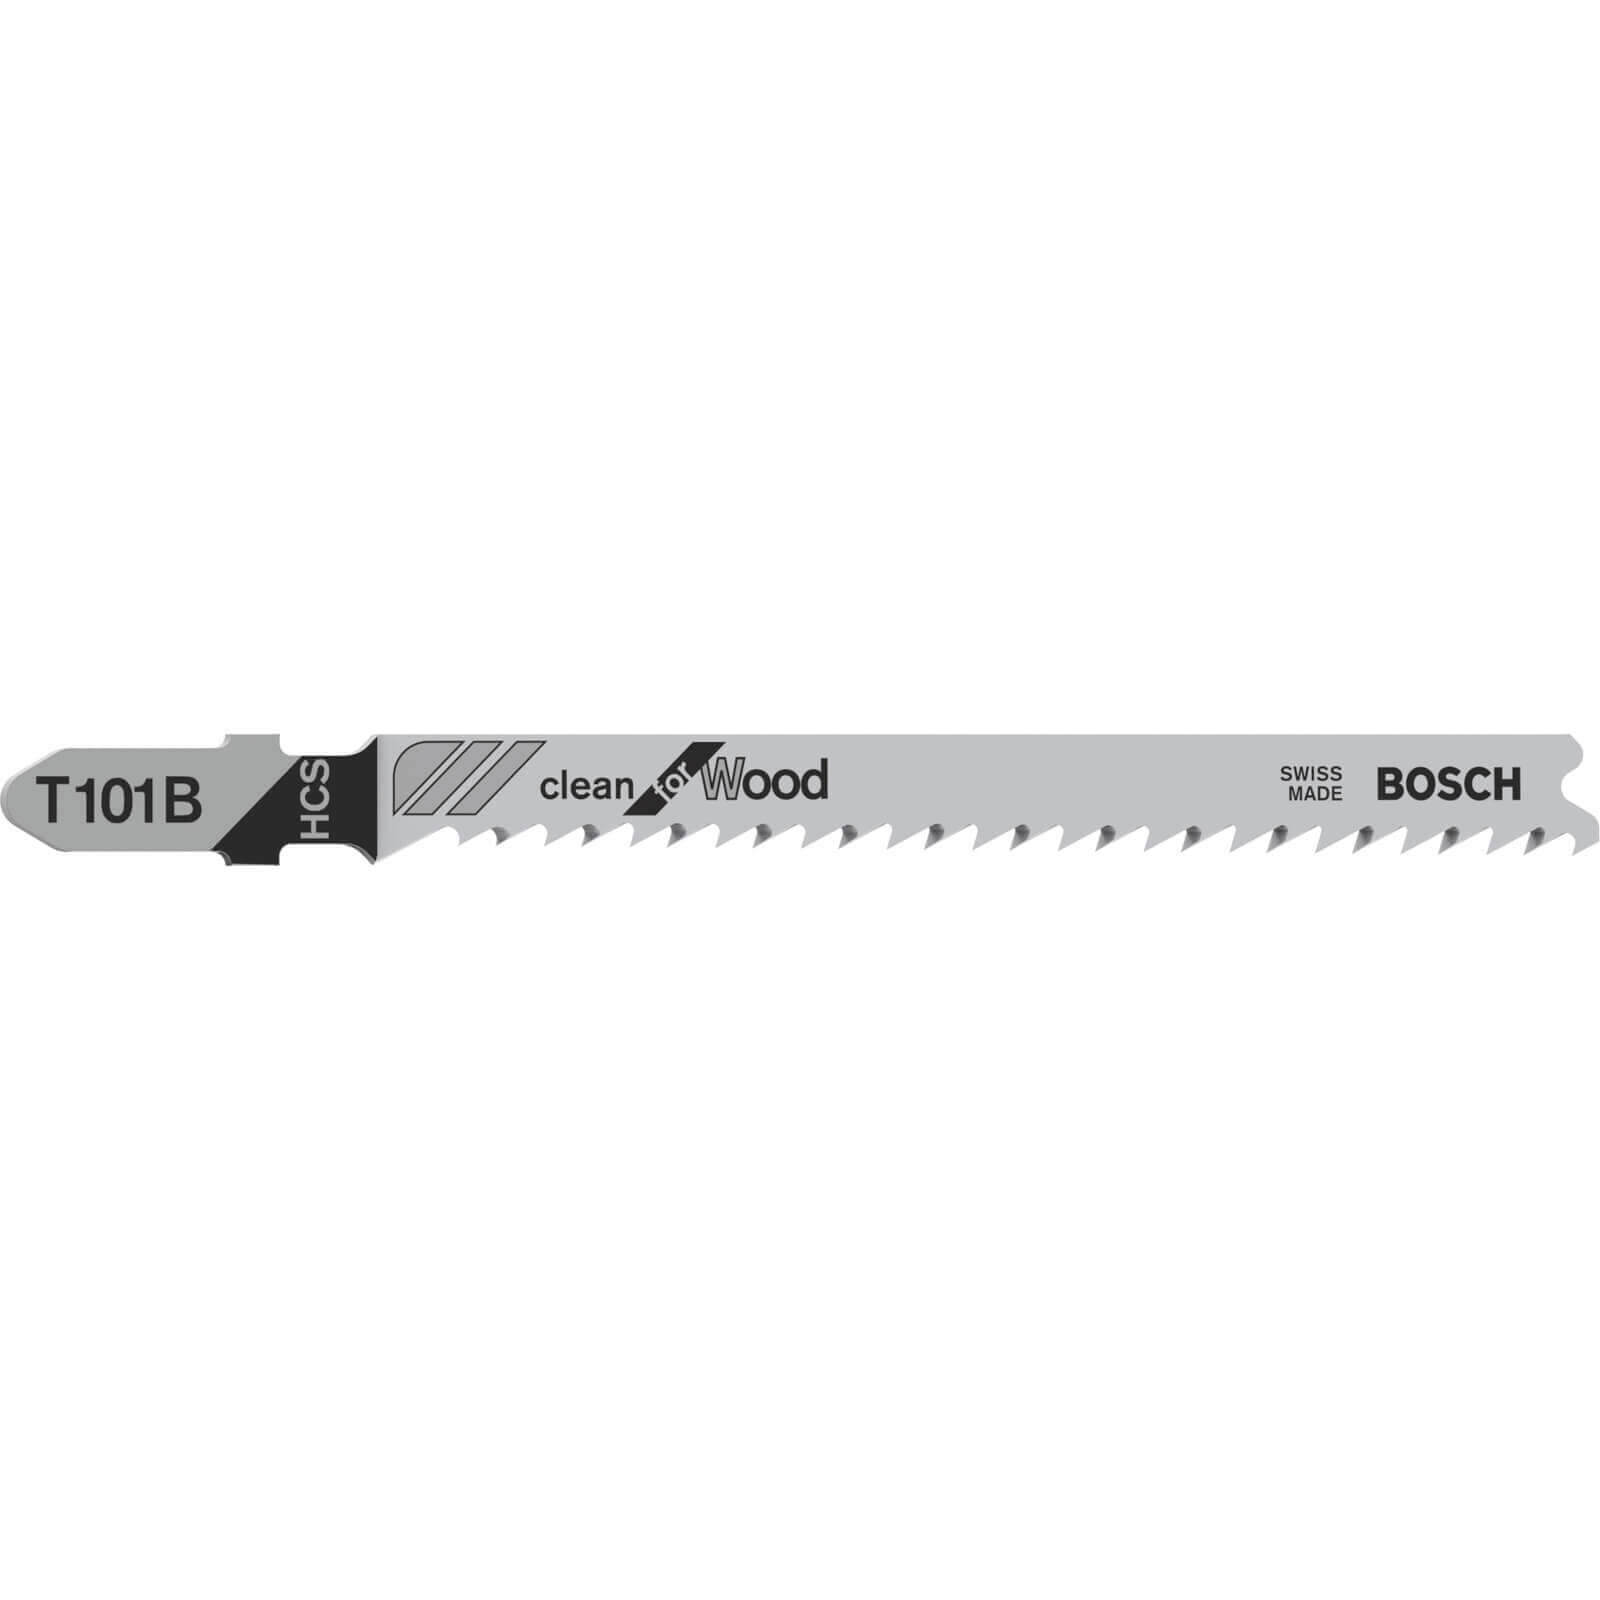 Image of Bosch T101 B Wood Cutting Jigsaw Blades Pack of 25